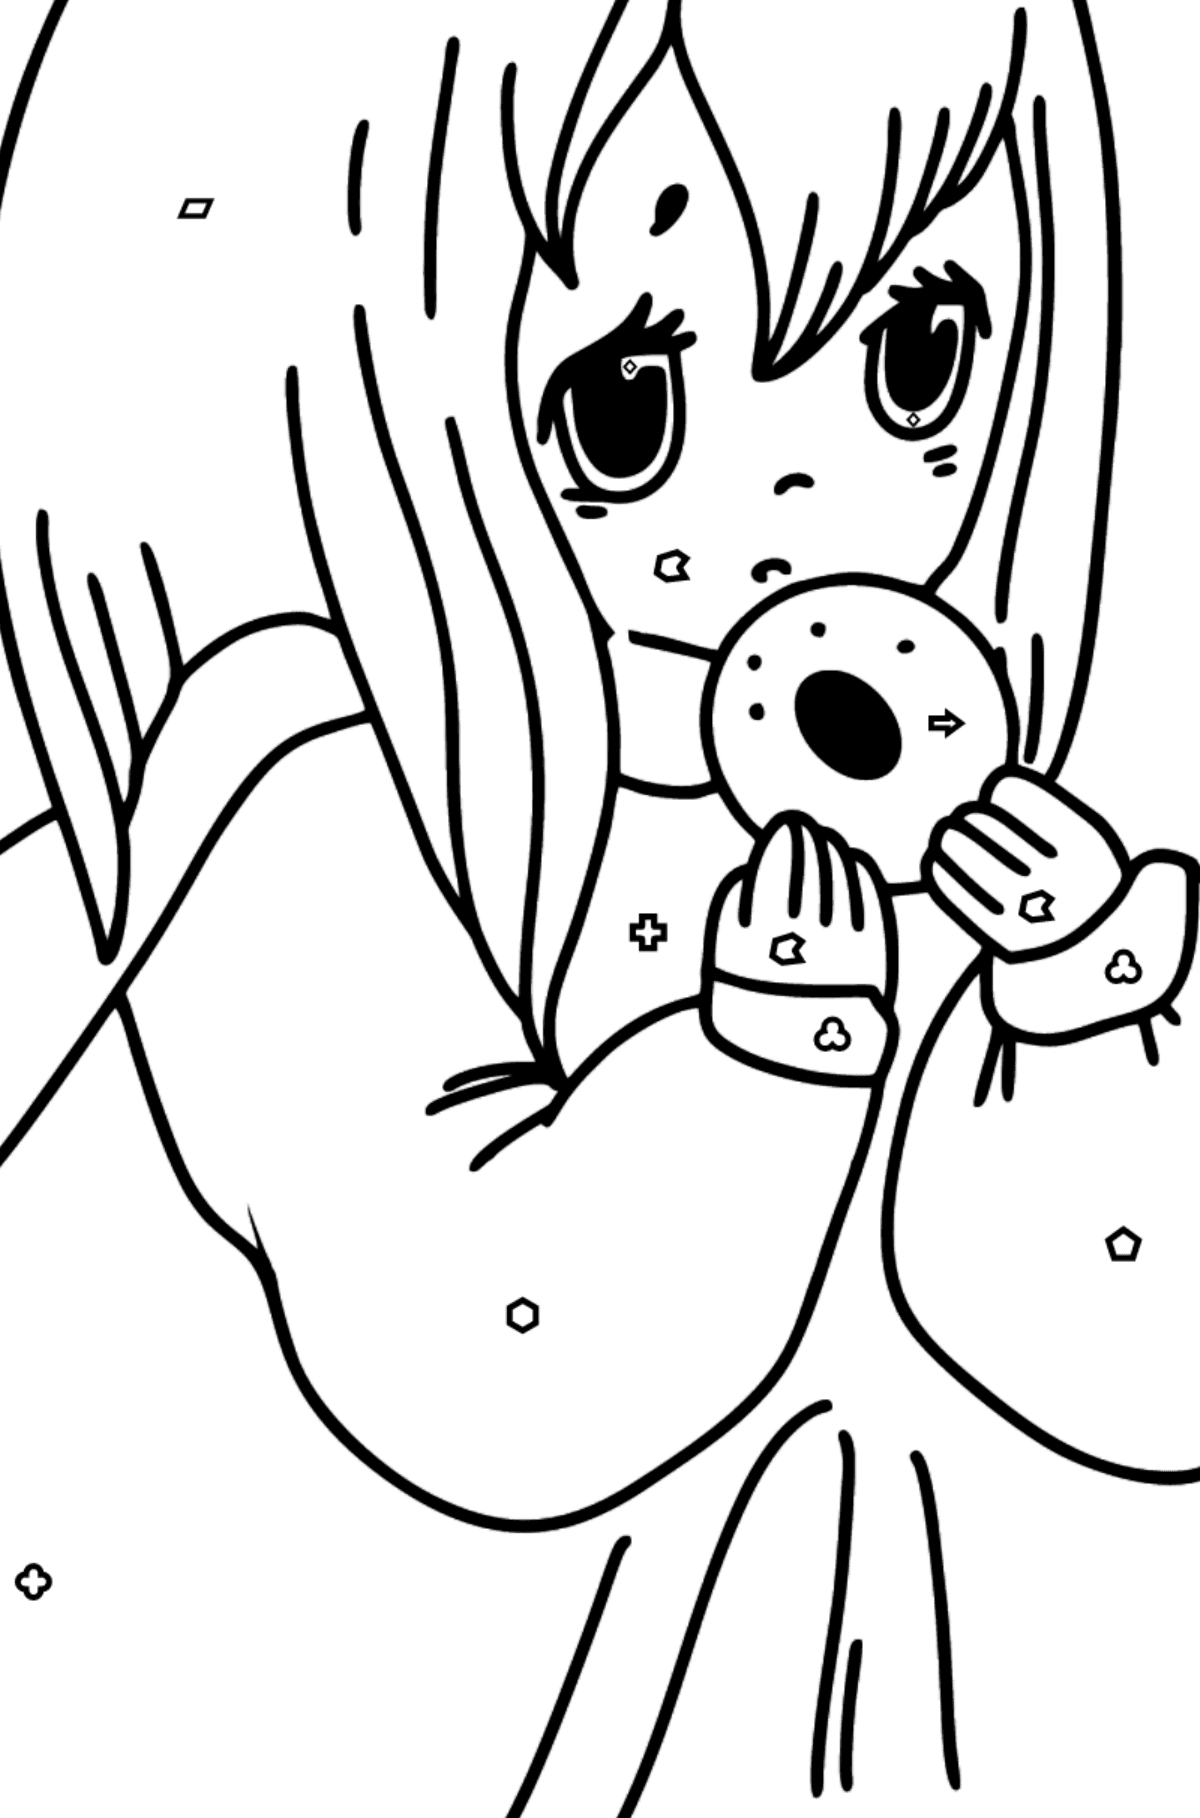 Anime Girl with Donut coloring page - Coloring by Geometric Shapes for Kids